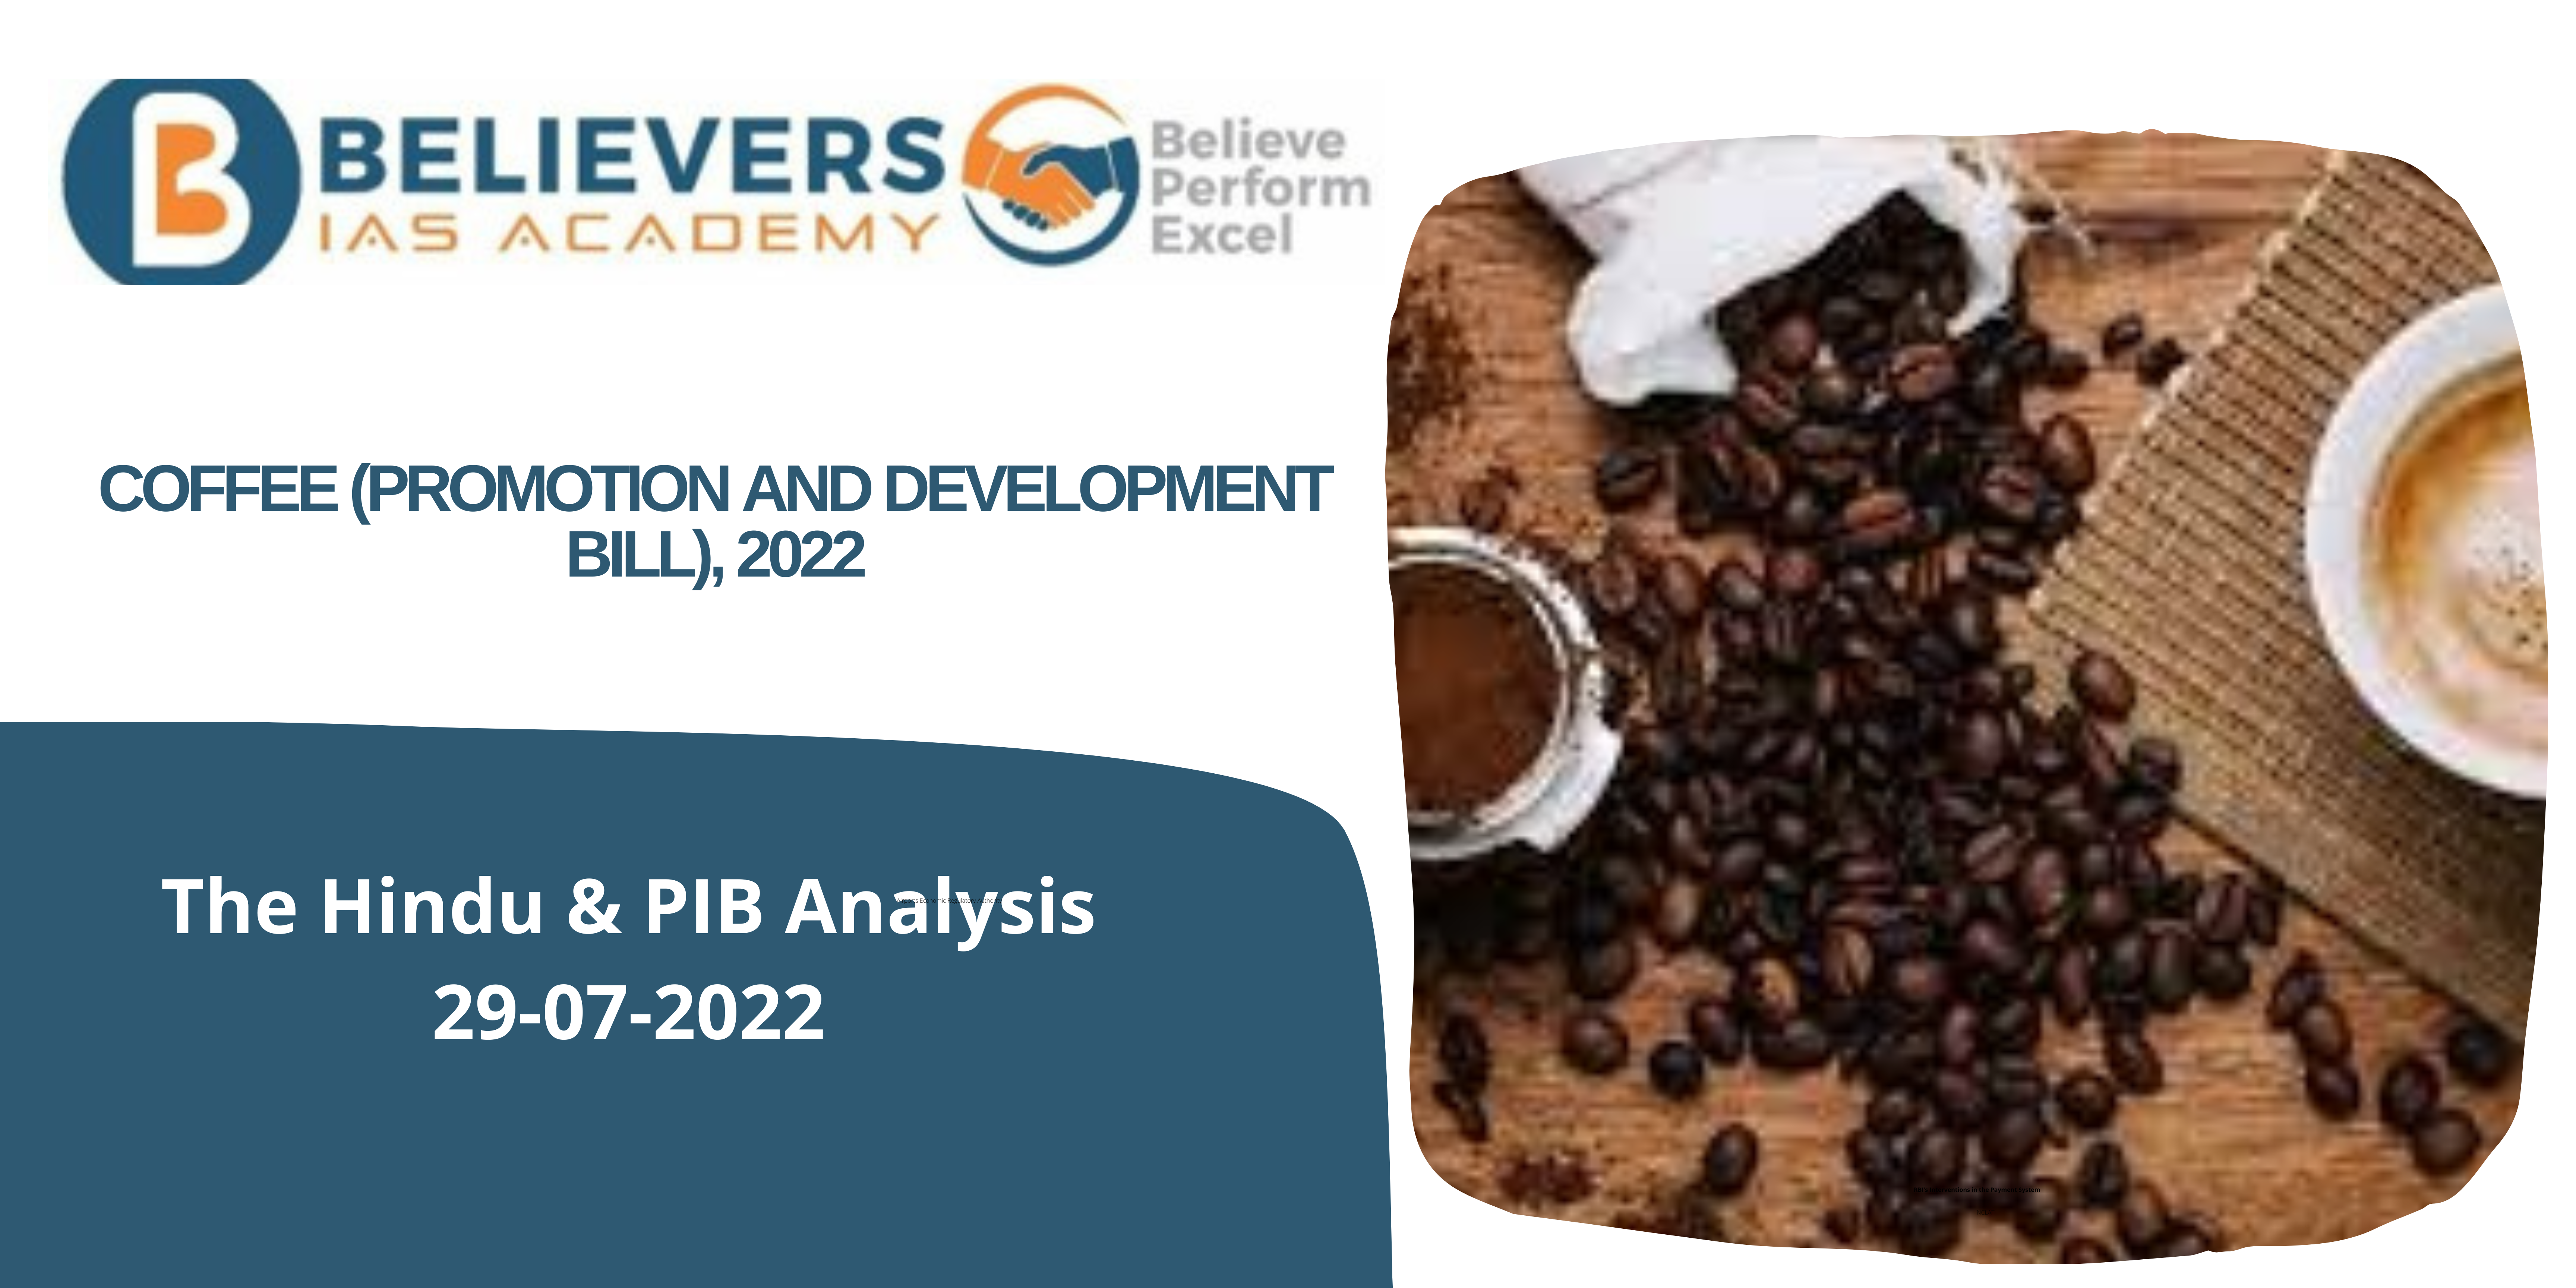 UPSC Current affairs - Coffee (Promotion and Development Bill), 2022